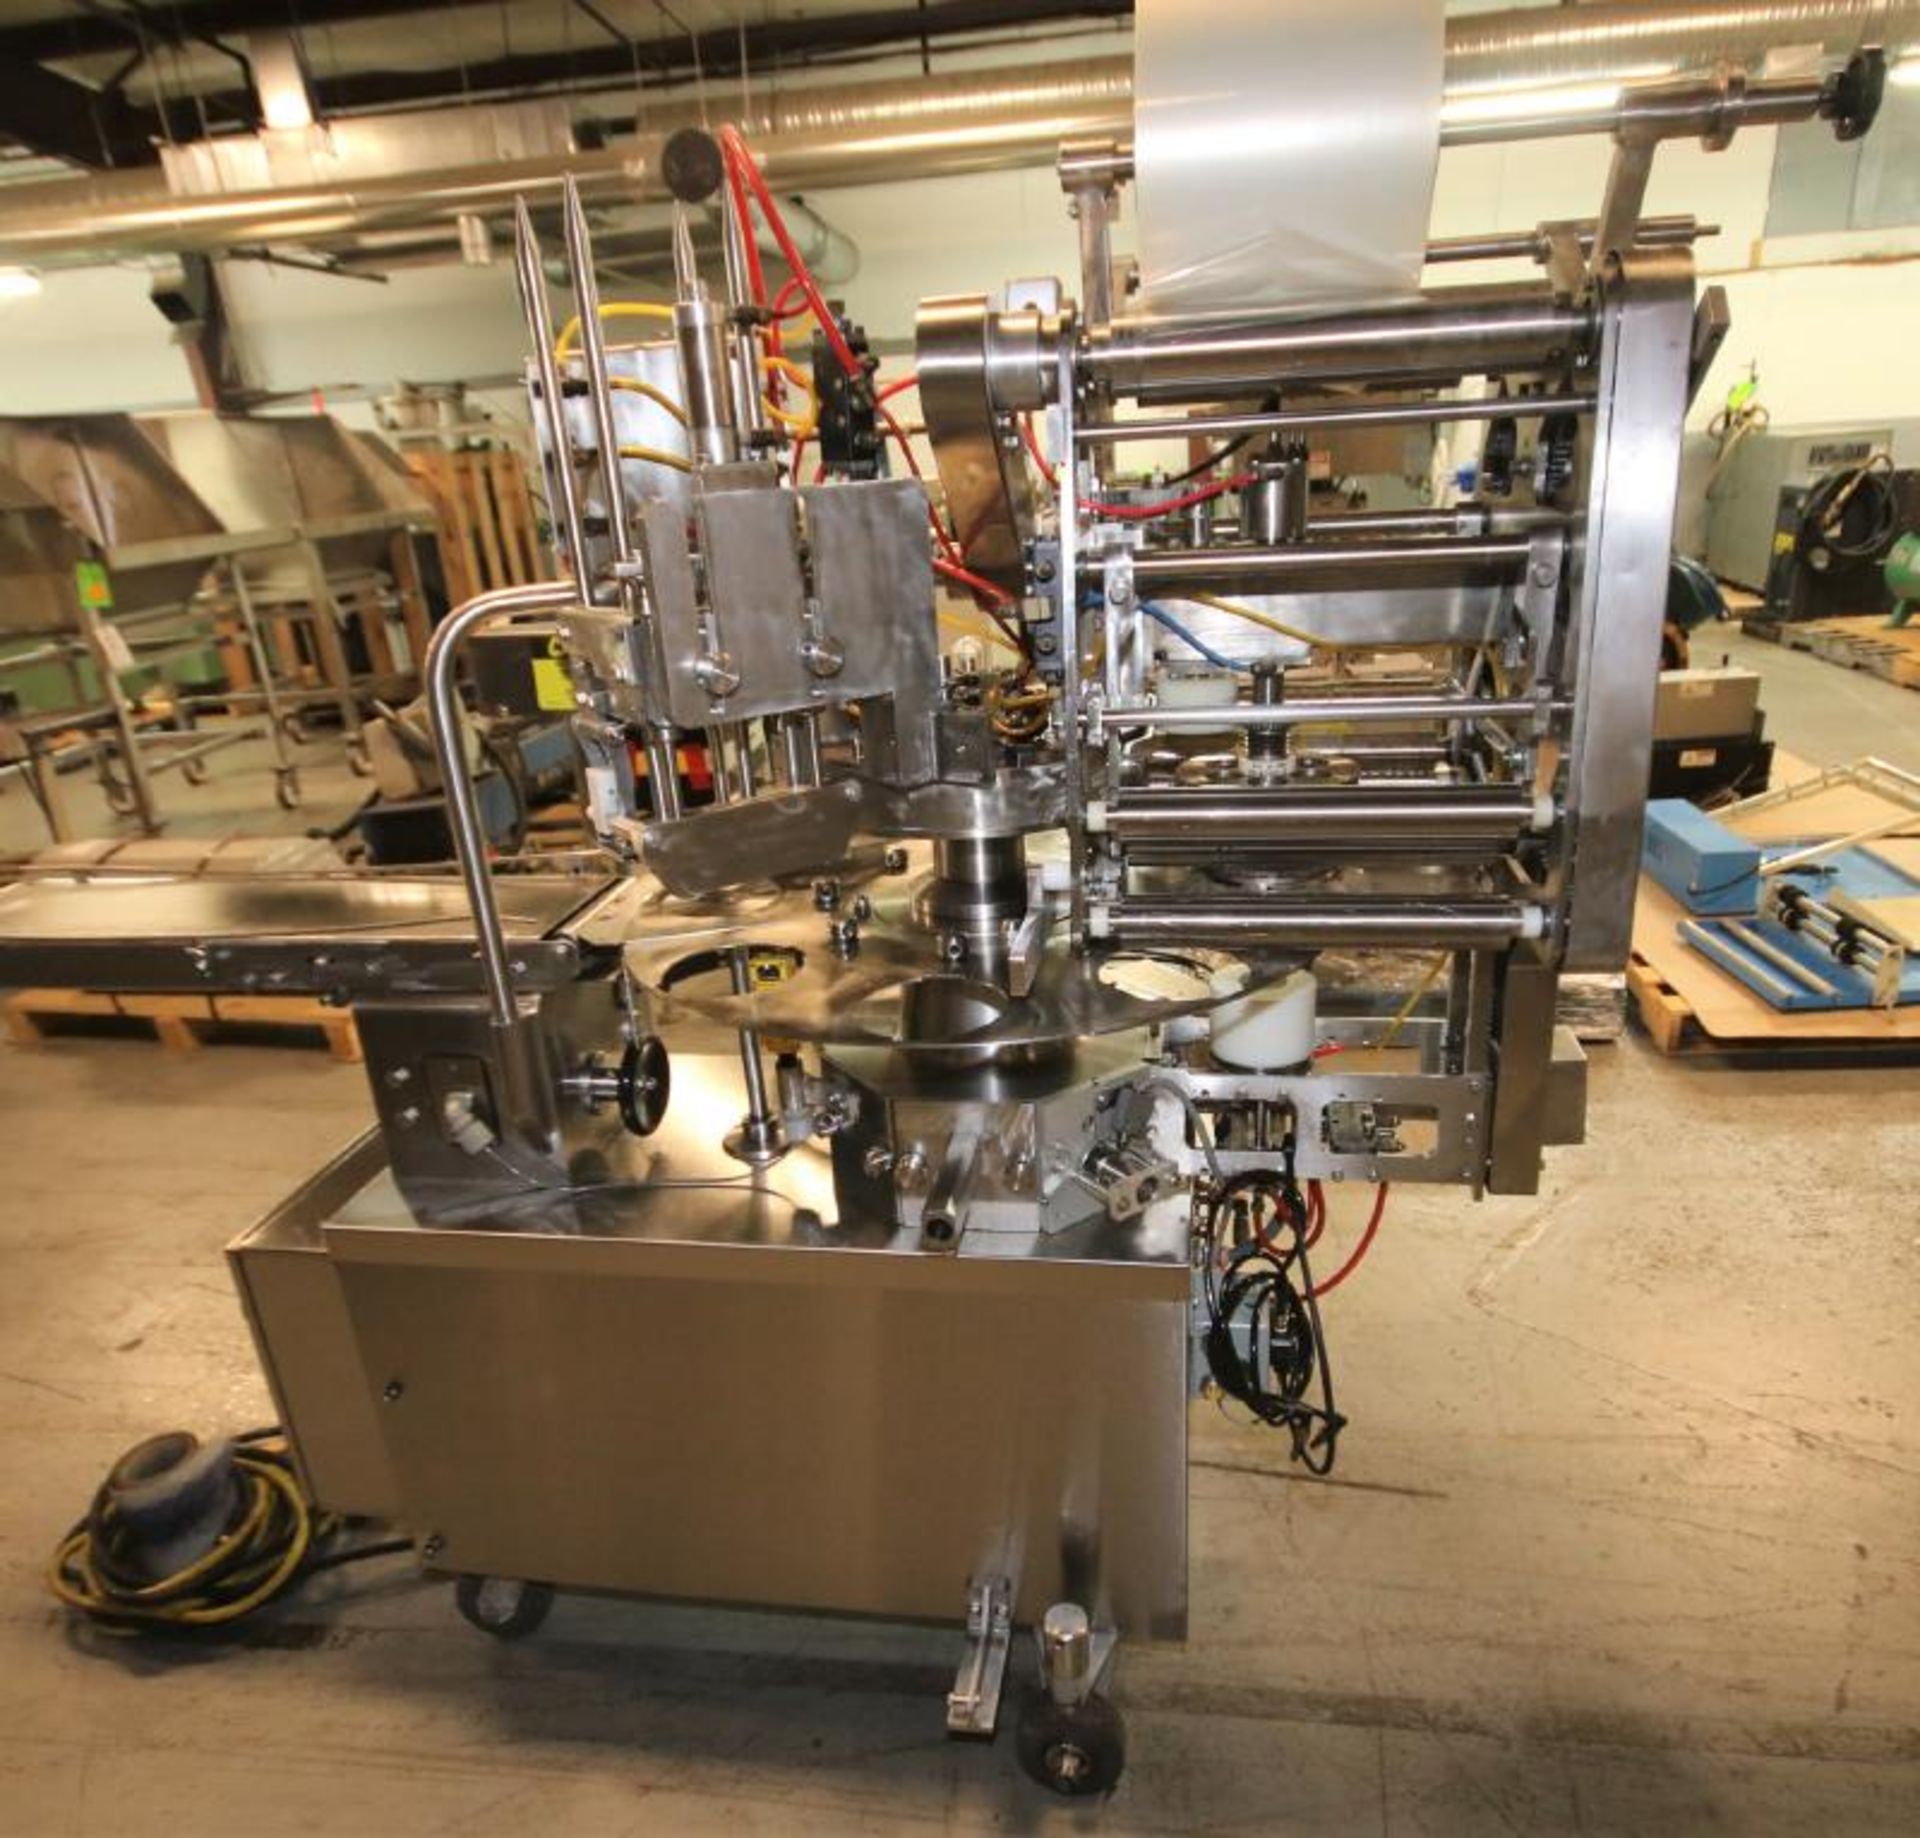 Sweetheart Cup. Co. / Flexefill 8 - Station Rotary S/S Cup Sealer, SN 23-02, Set - Up with 5.5" - Image 4 of 9